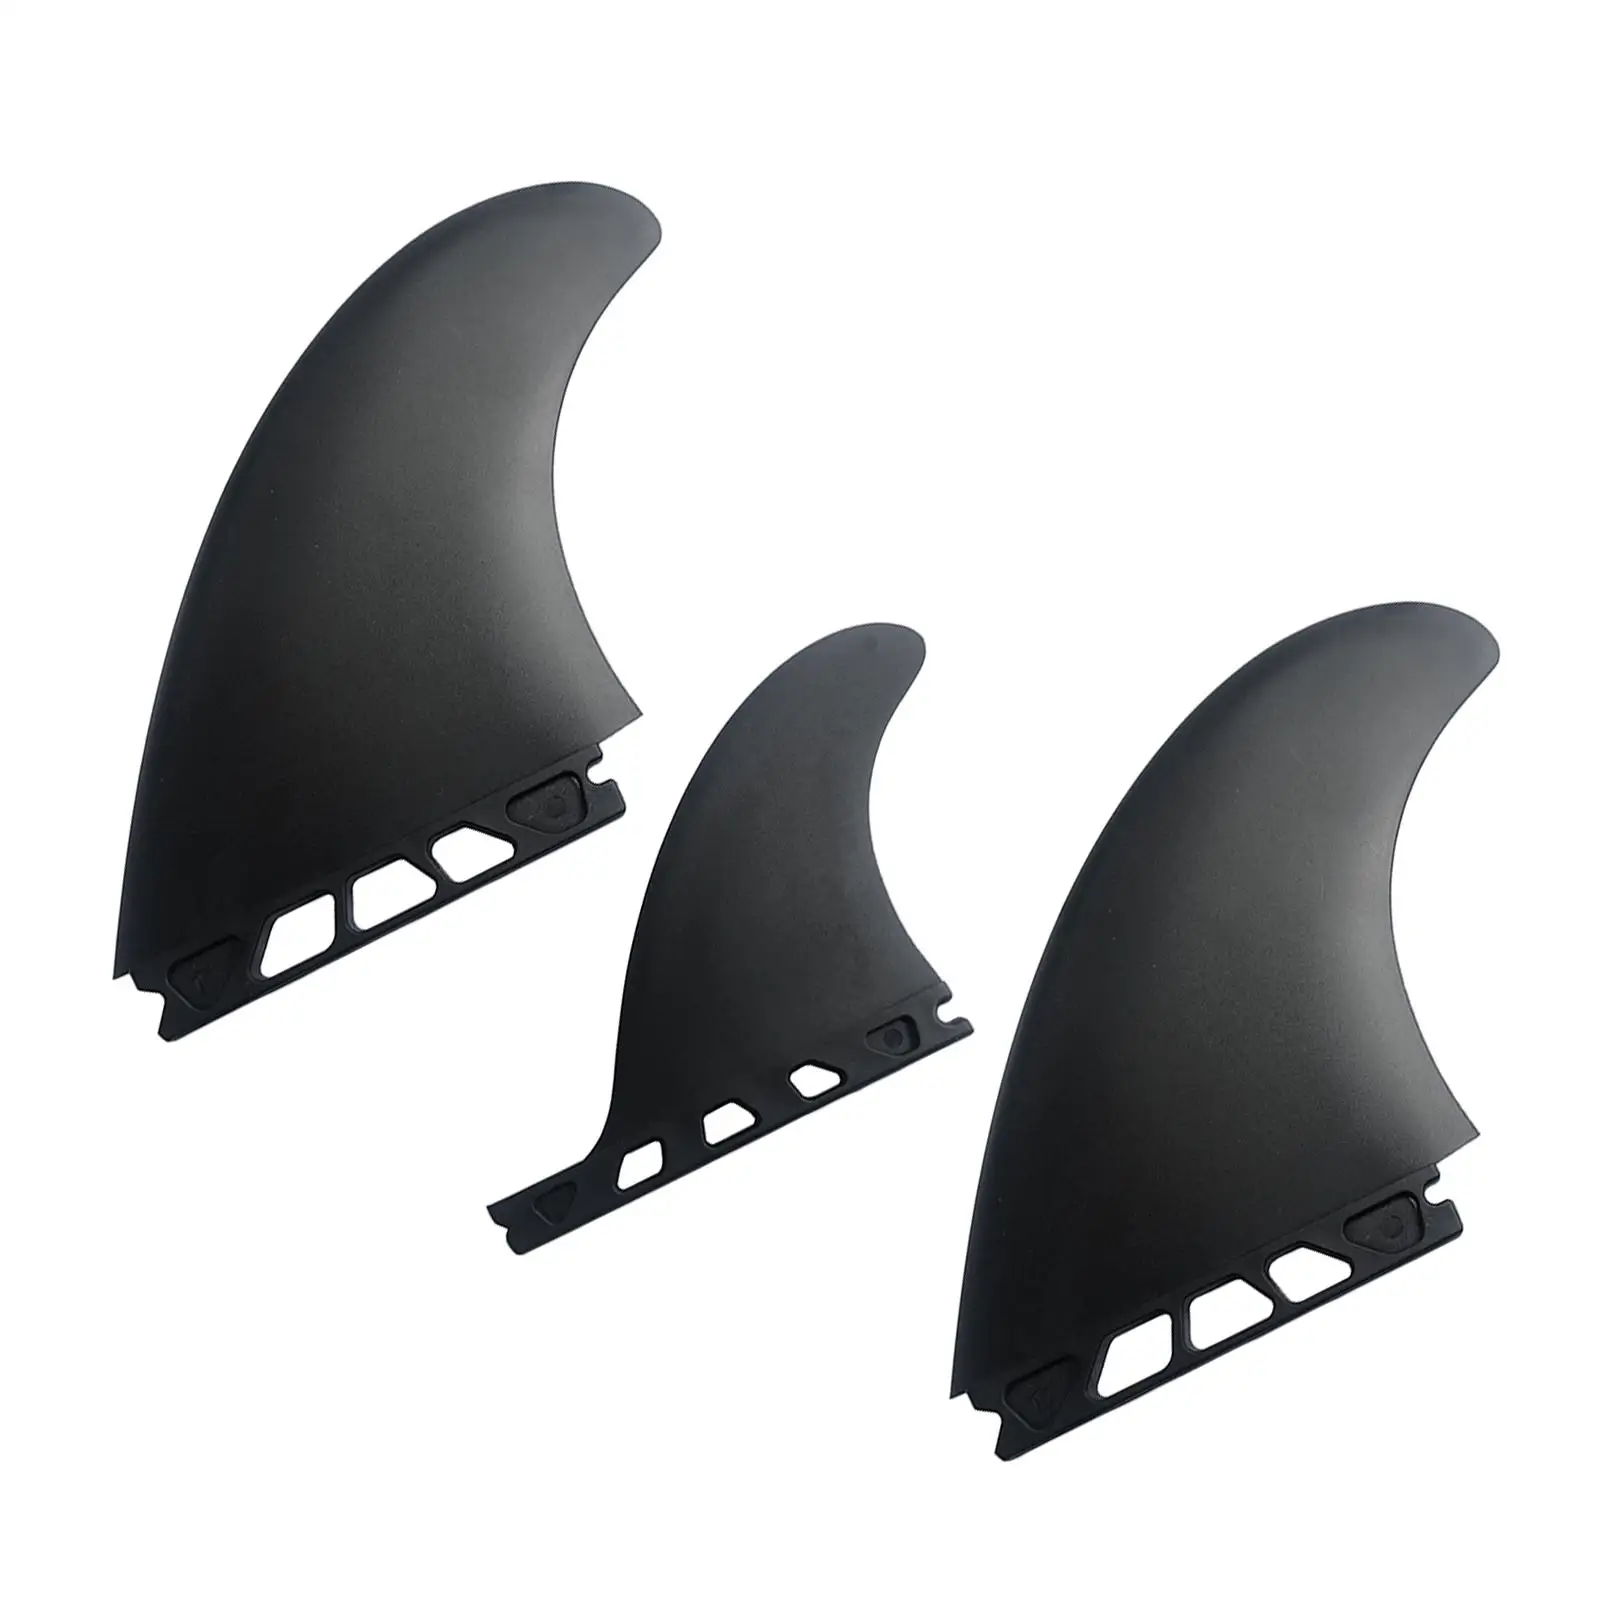 3 Pieces Surfboard Fins Replacement Surfing Fin for Canoe Stand up Paddleboard